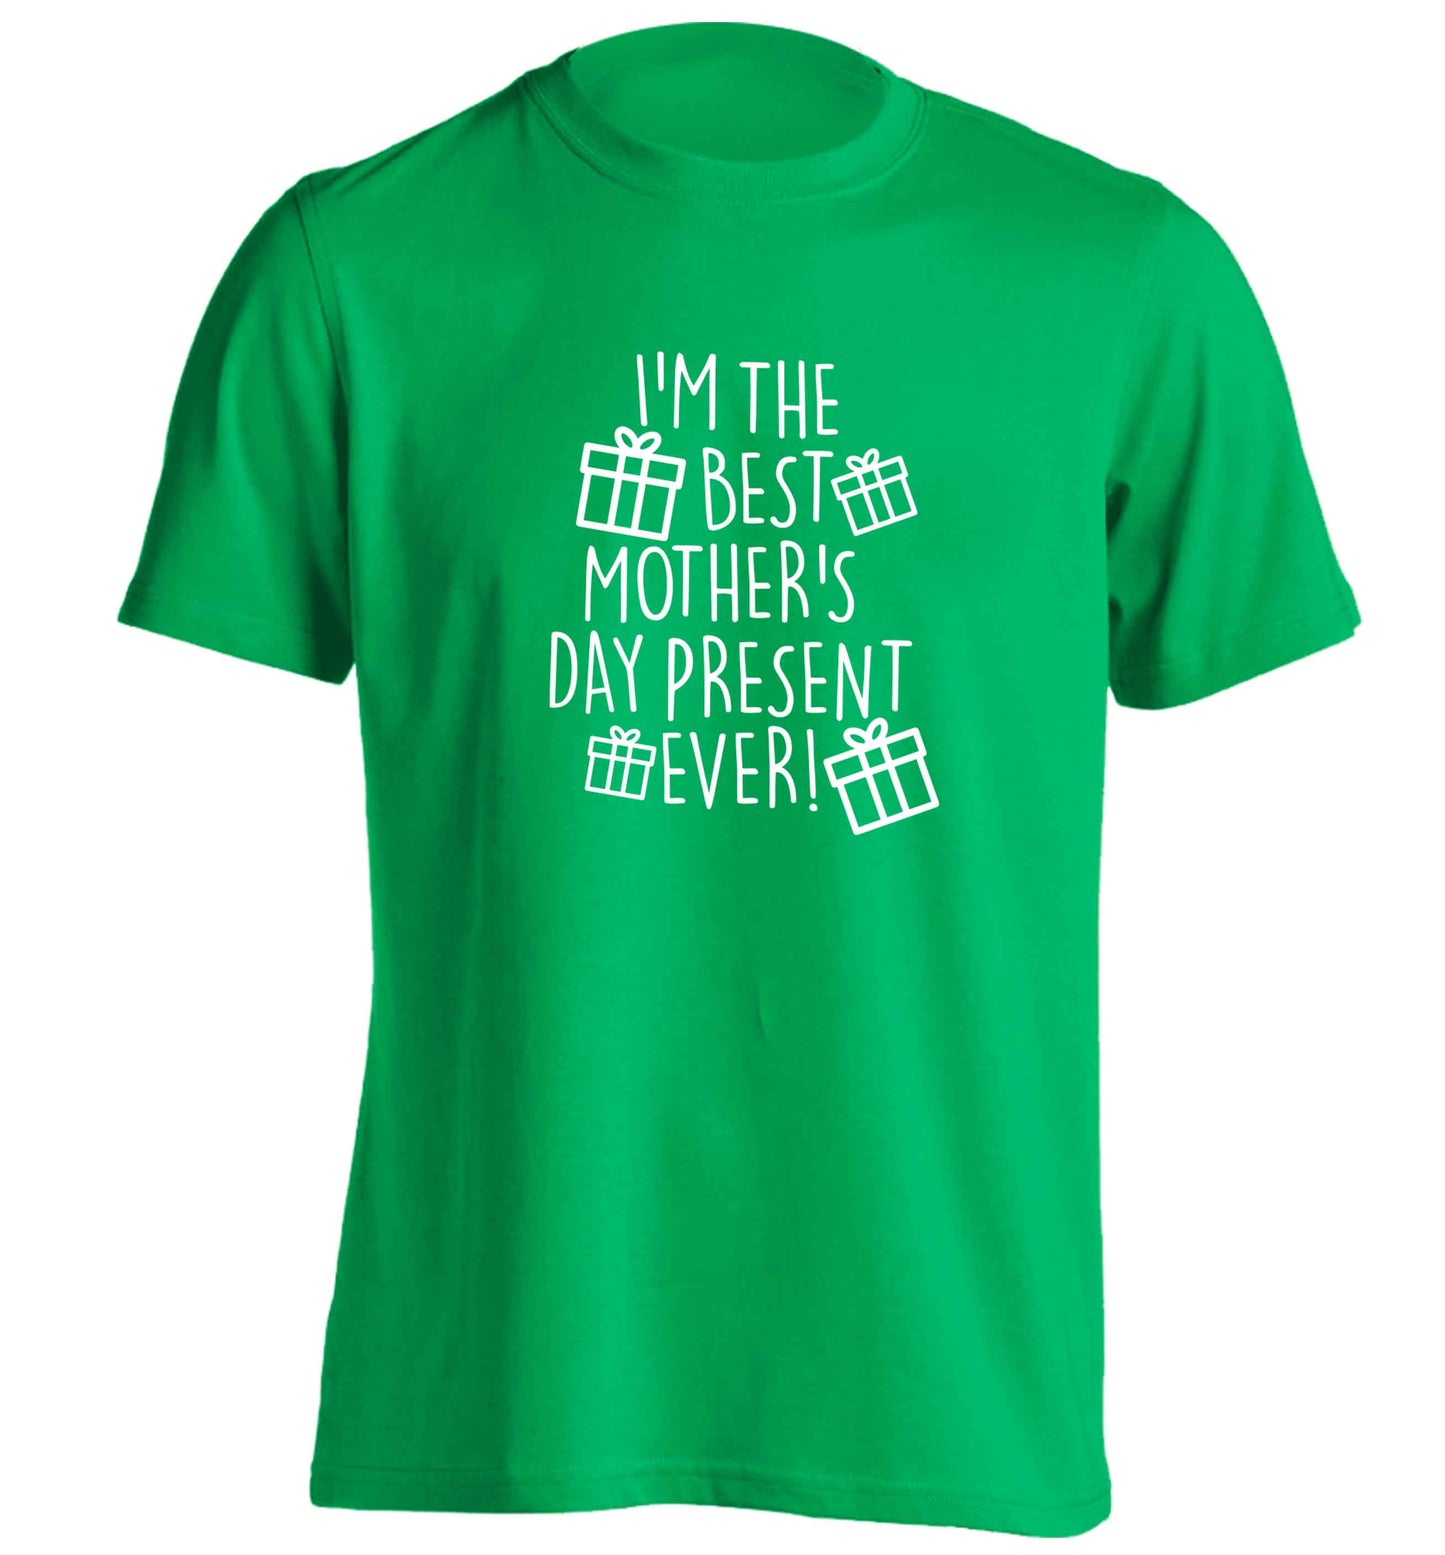 I'm the best mother's day present ever! adults unisex green Tshirt 2XL